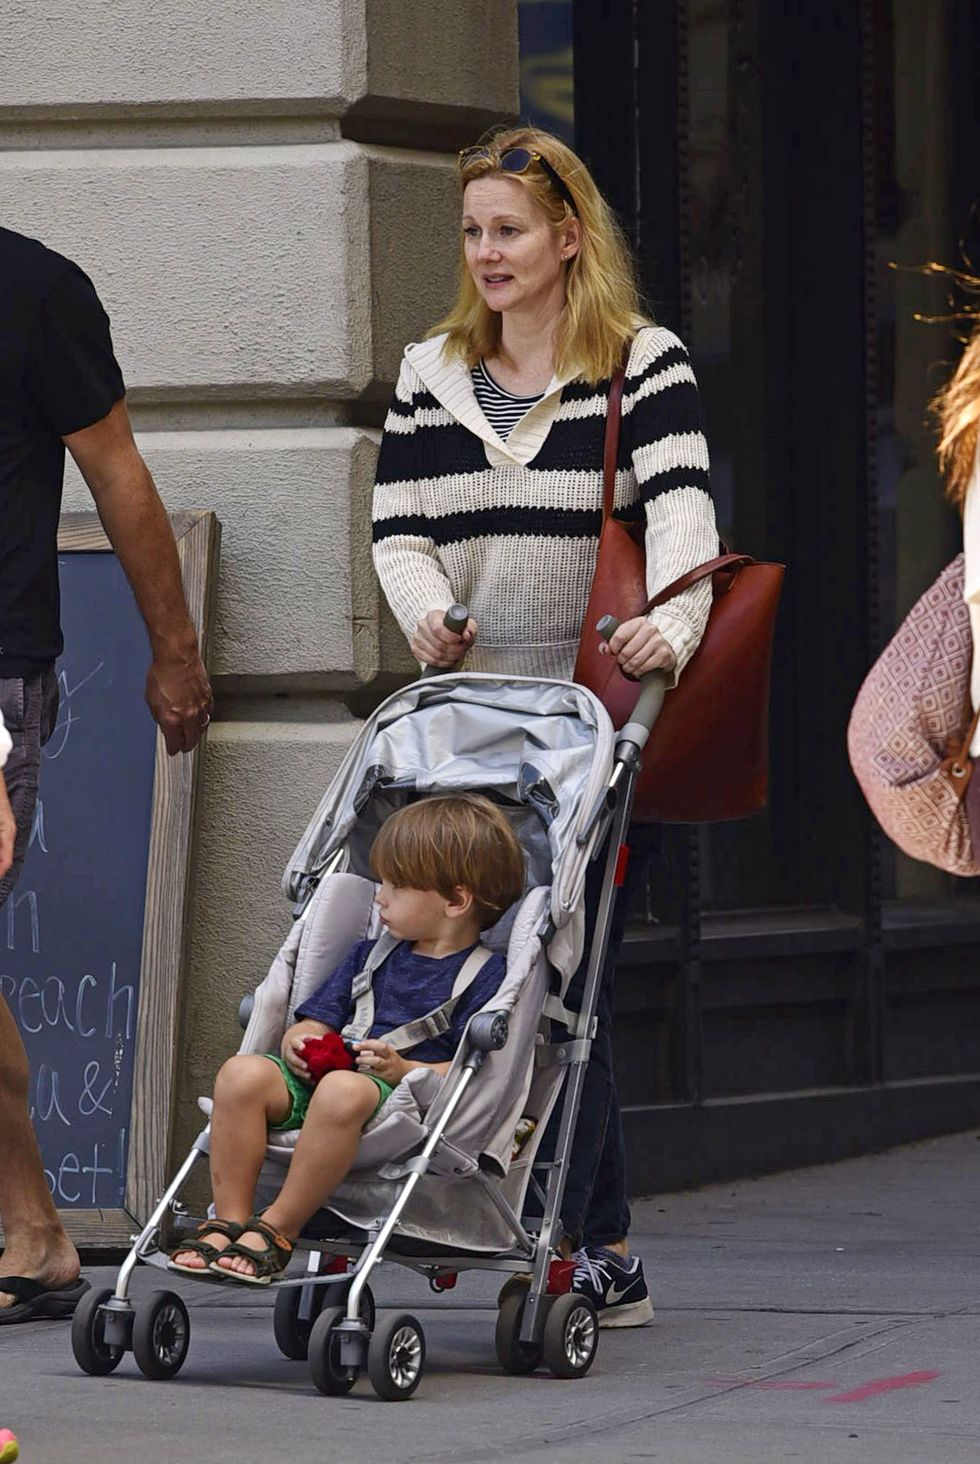 exclusive laura linney and husband marc schauer seen out with their son bennett schauer in brooklyn, new york today the 52 year old american actress and her real estate agent husband were dressed for the beautiful fall like temps in the city this weekendplease bylinetheimagedirectcom